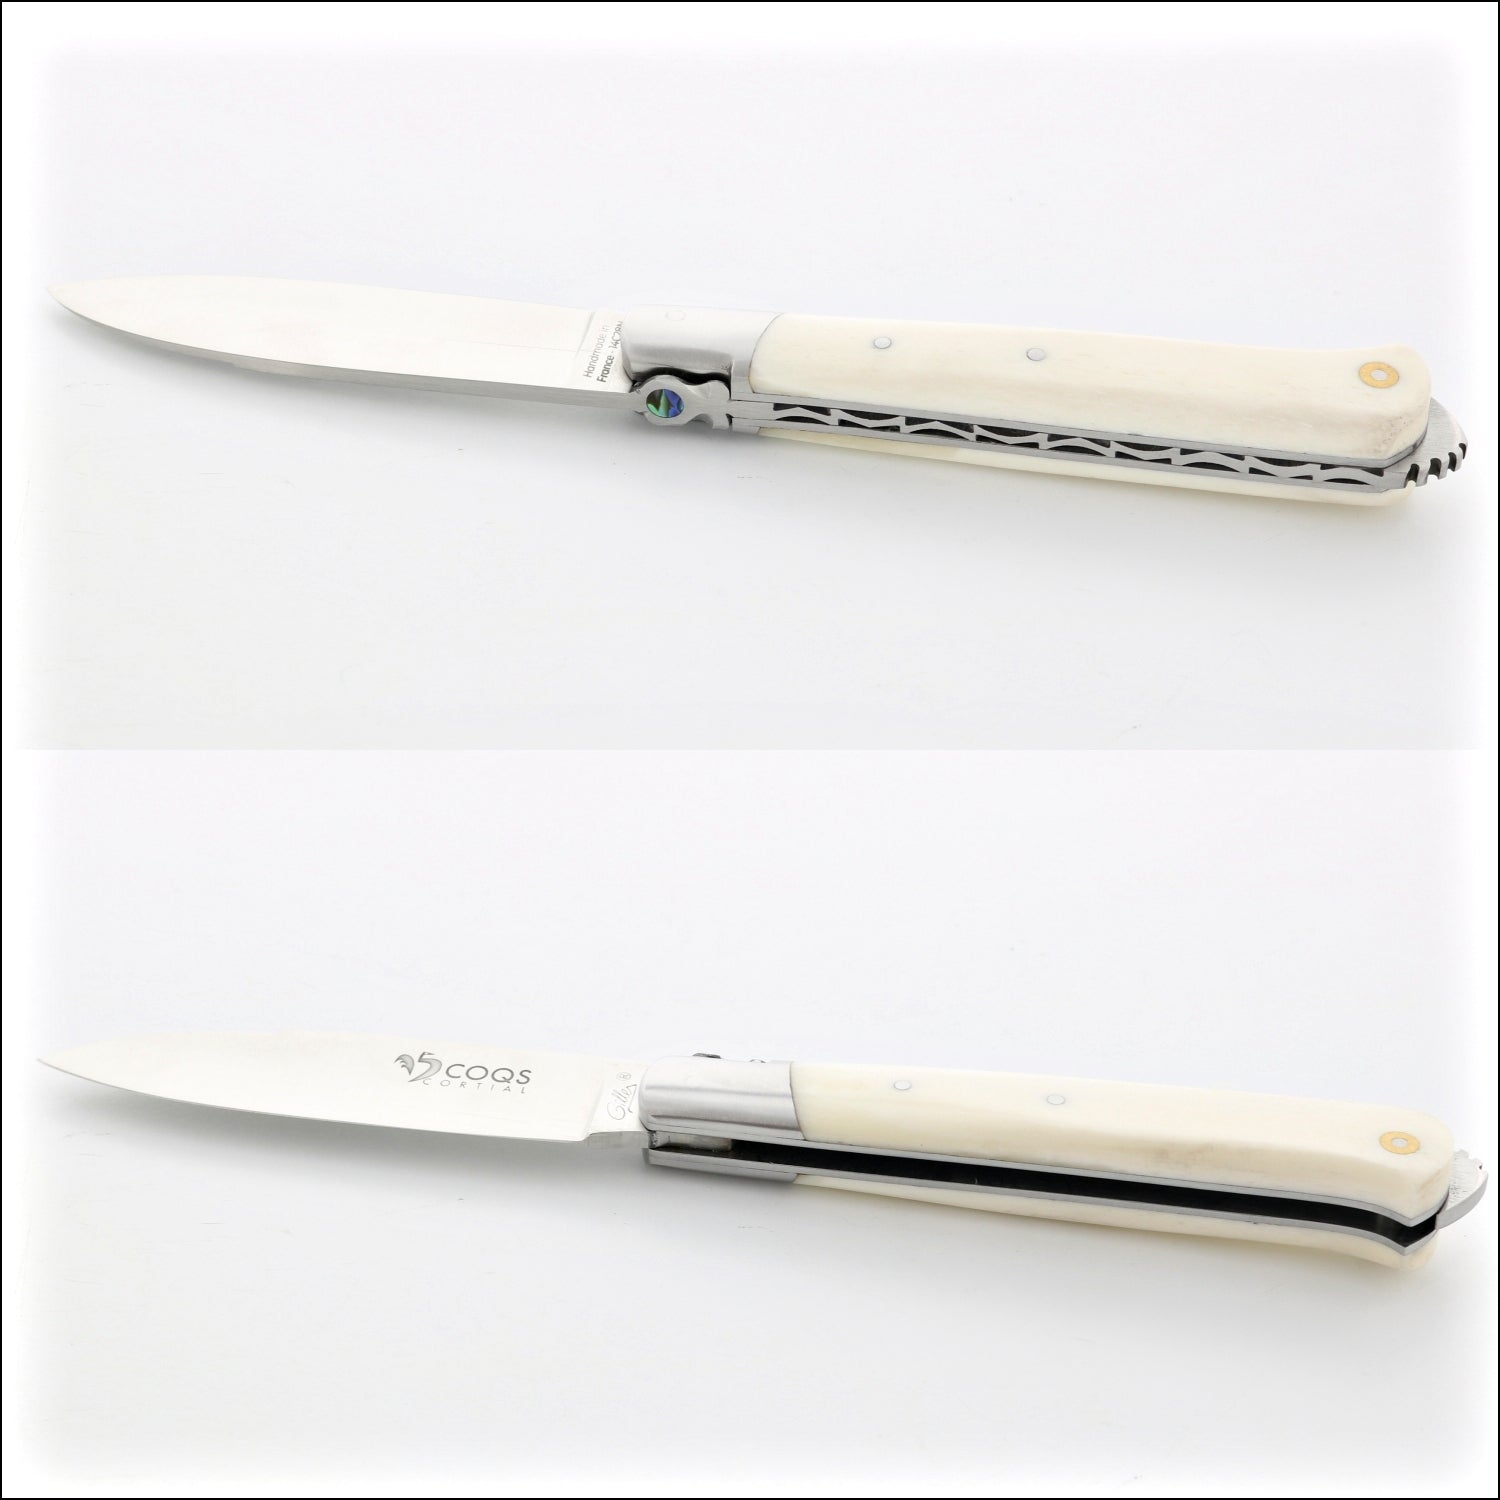 5 Coqs Pocket Knife - Cattle Bone and Mother of Pearl Inlay